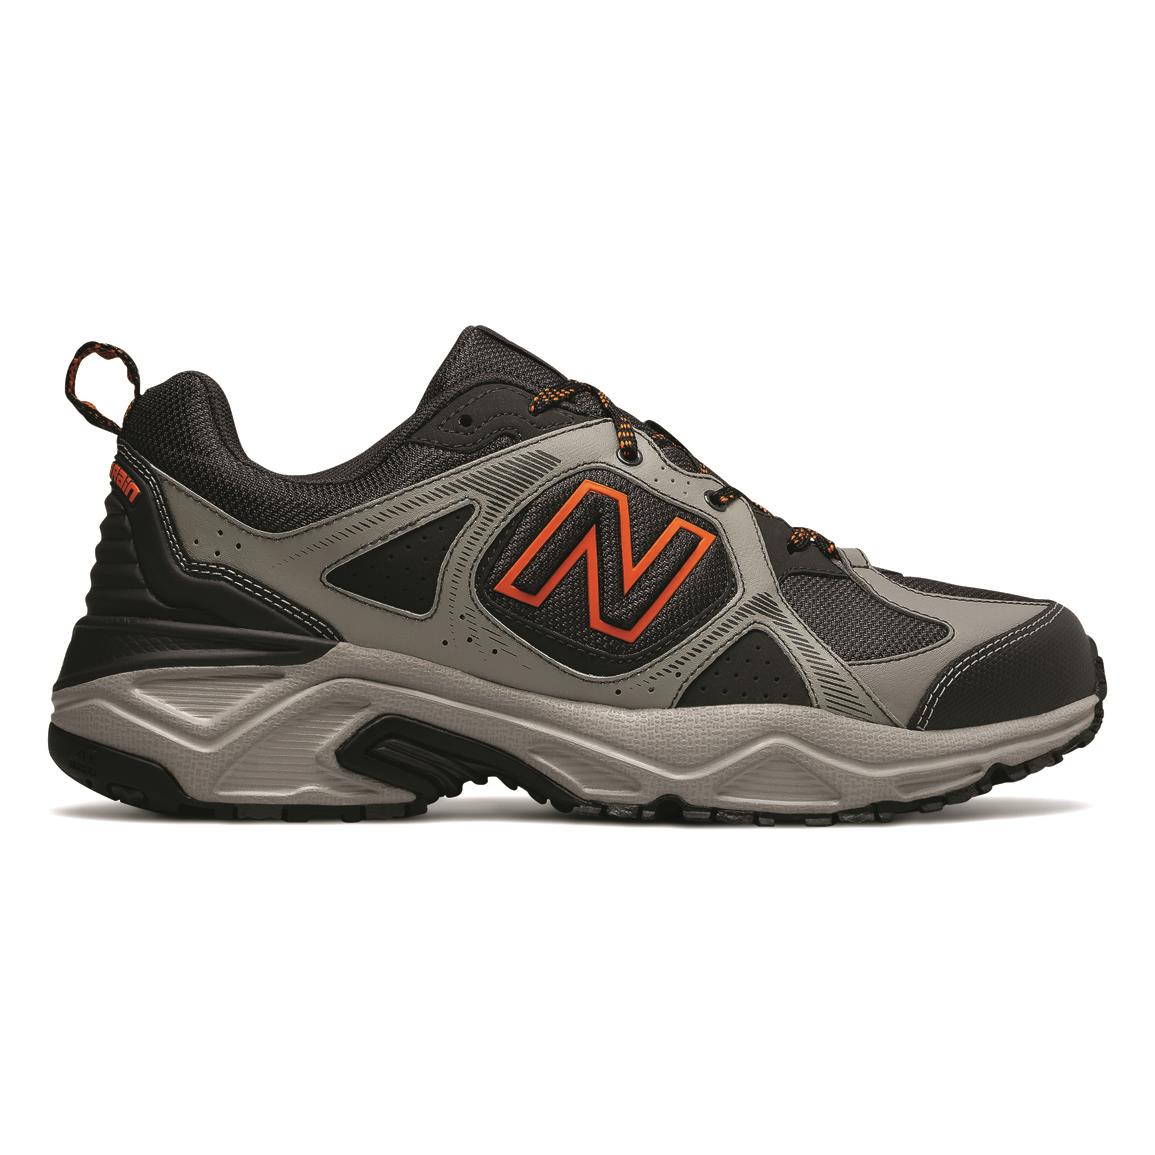 New Balance Men's MT481LC3 Trail Shoes - 704576, Running Shoes ...